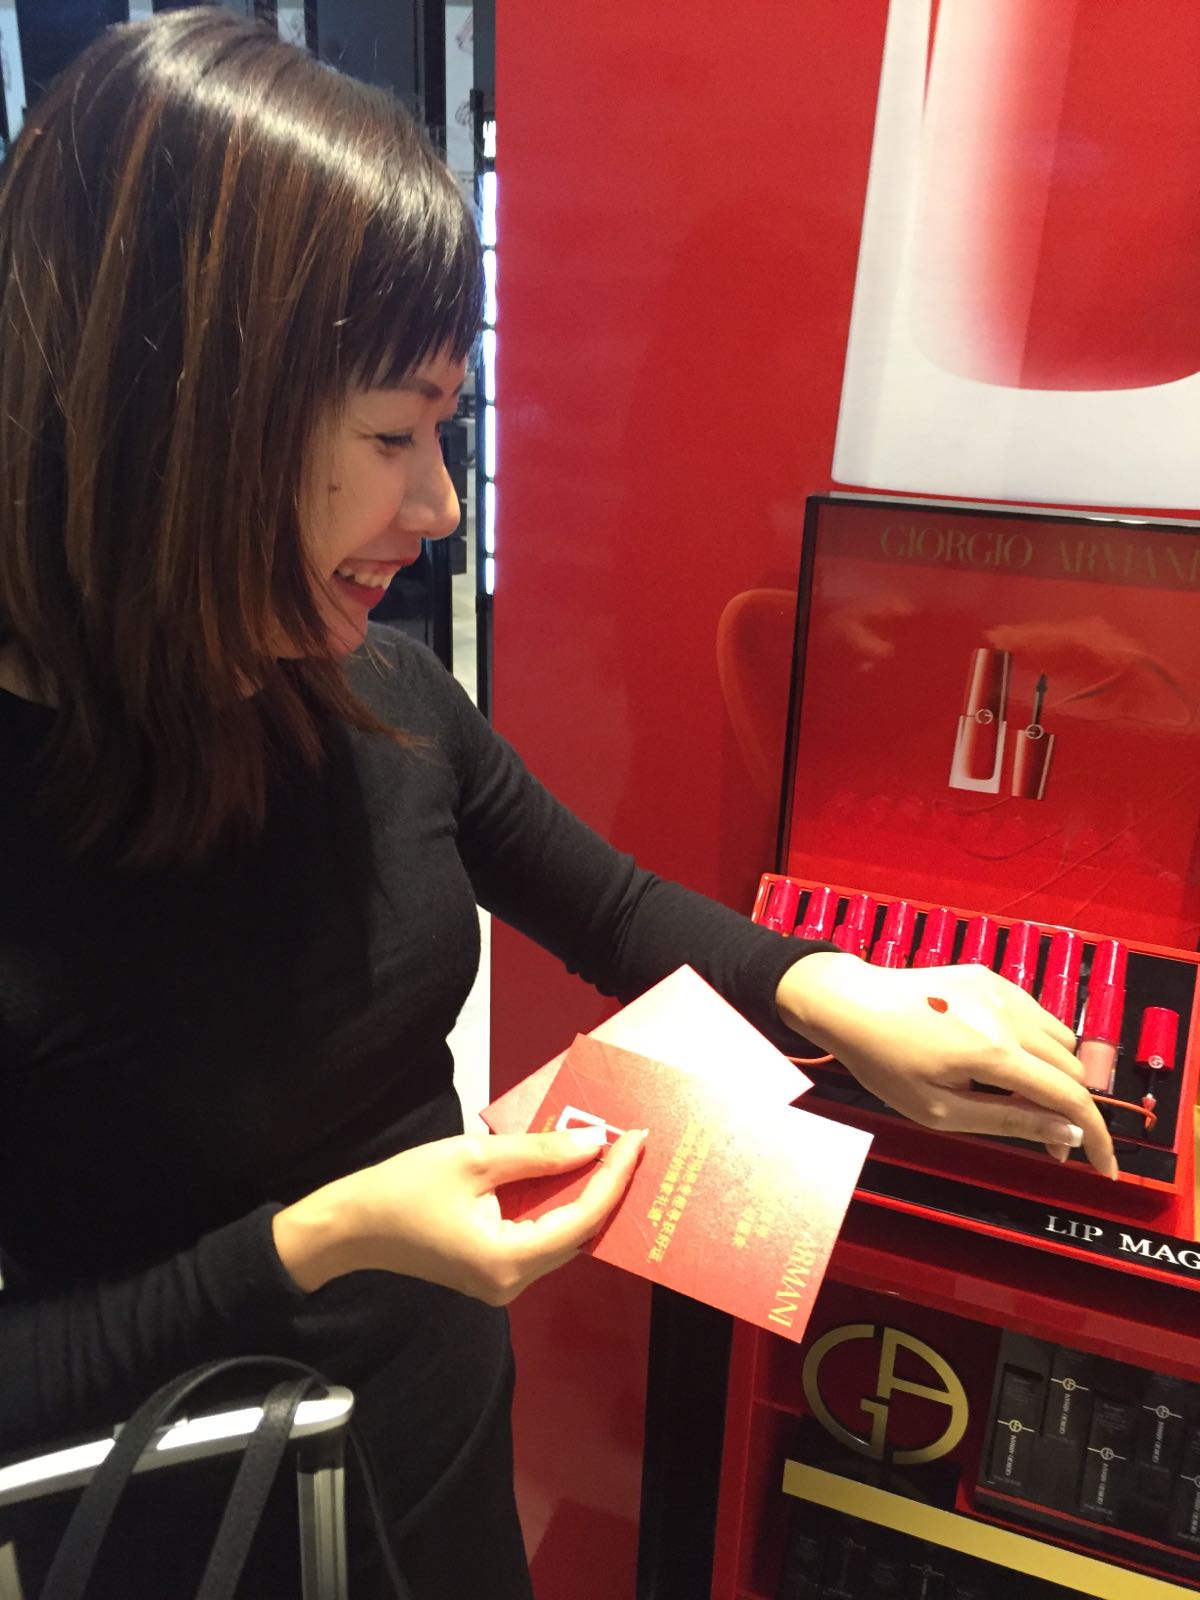 Good fortune awaits a visitor to Giorgio Armani Beauty at Los Angeles International Airport: exclusive gifts are revealed inside the red envelopes